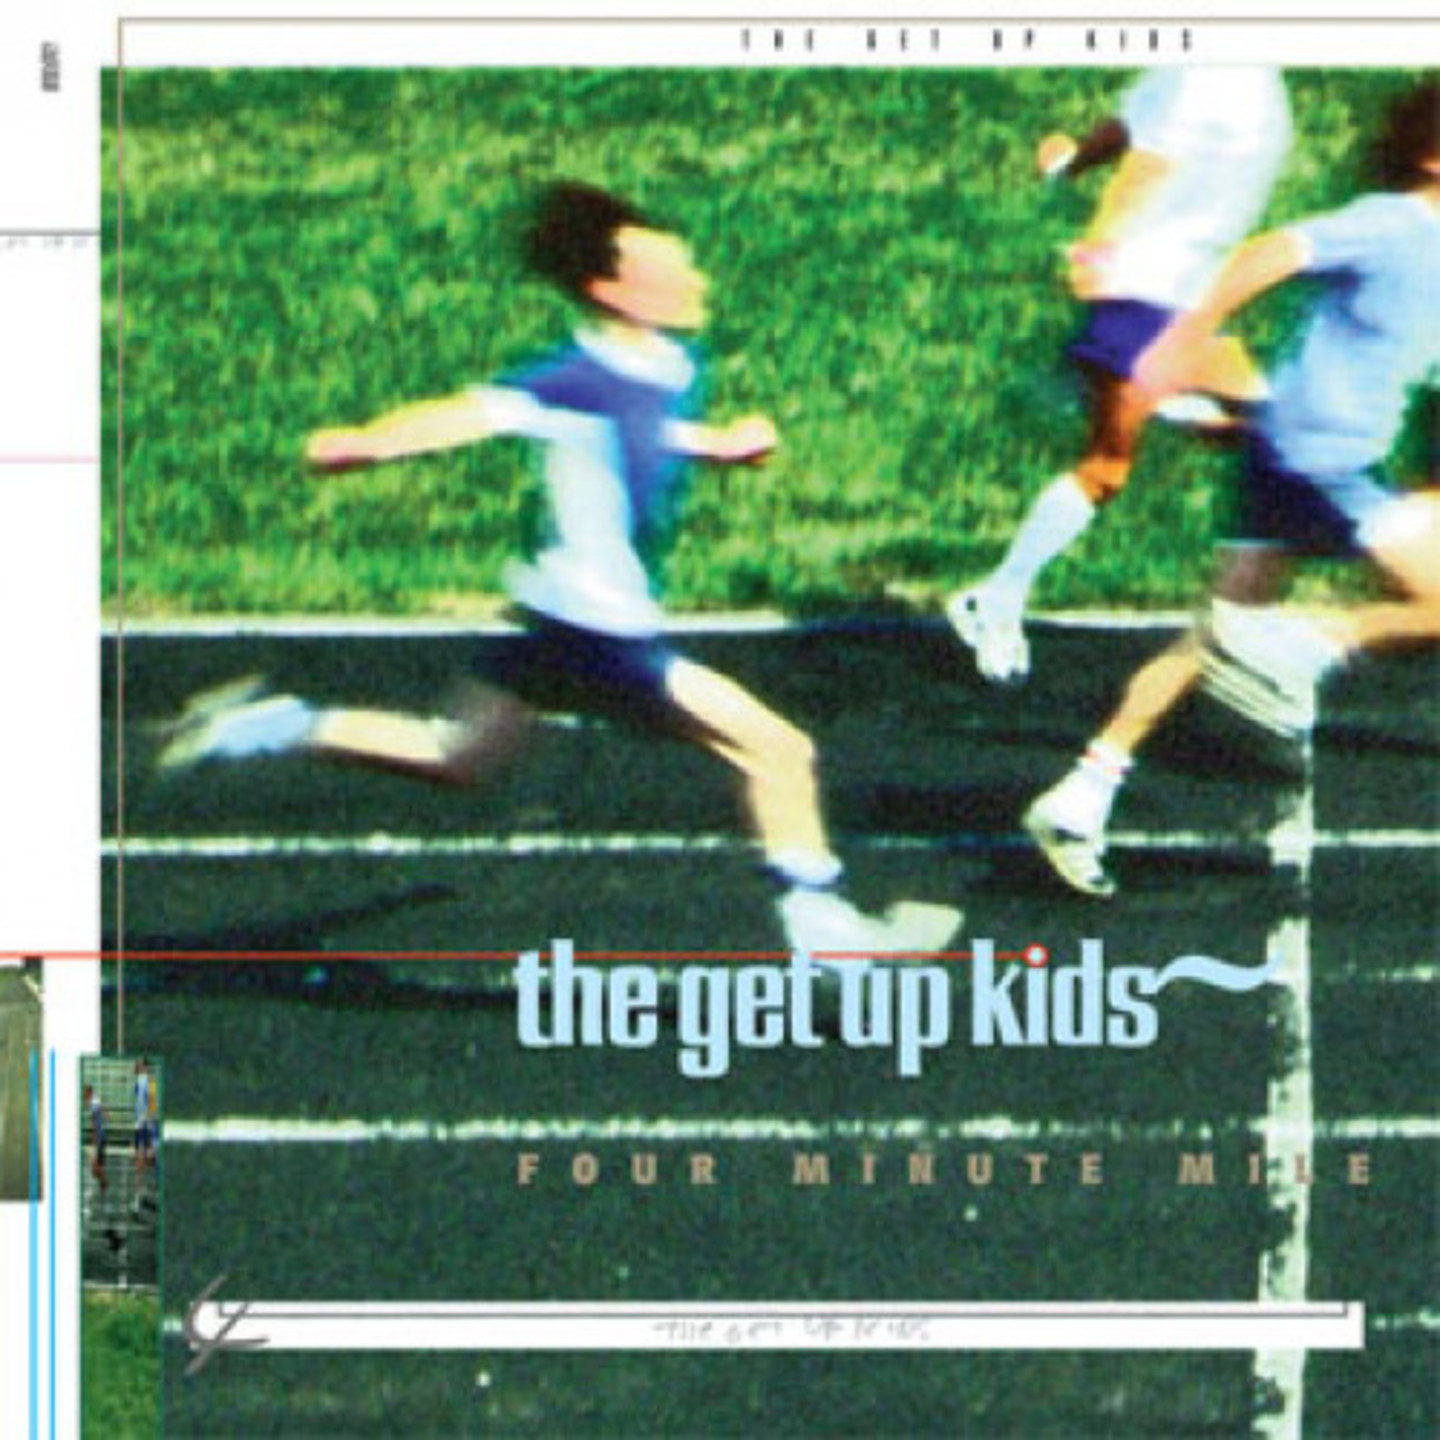 GET UP KIDS, THE - Four Minute Mile LP